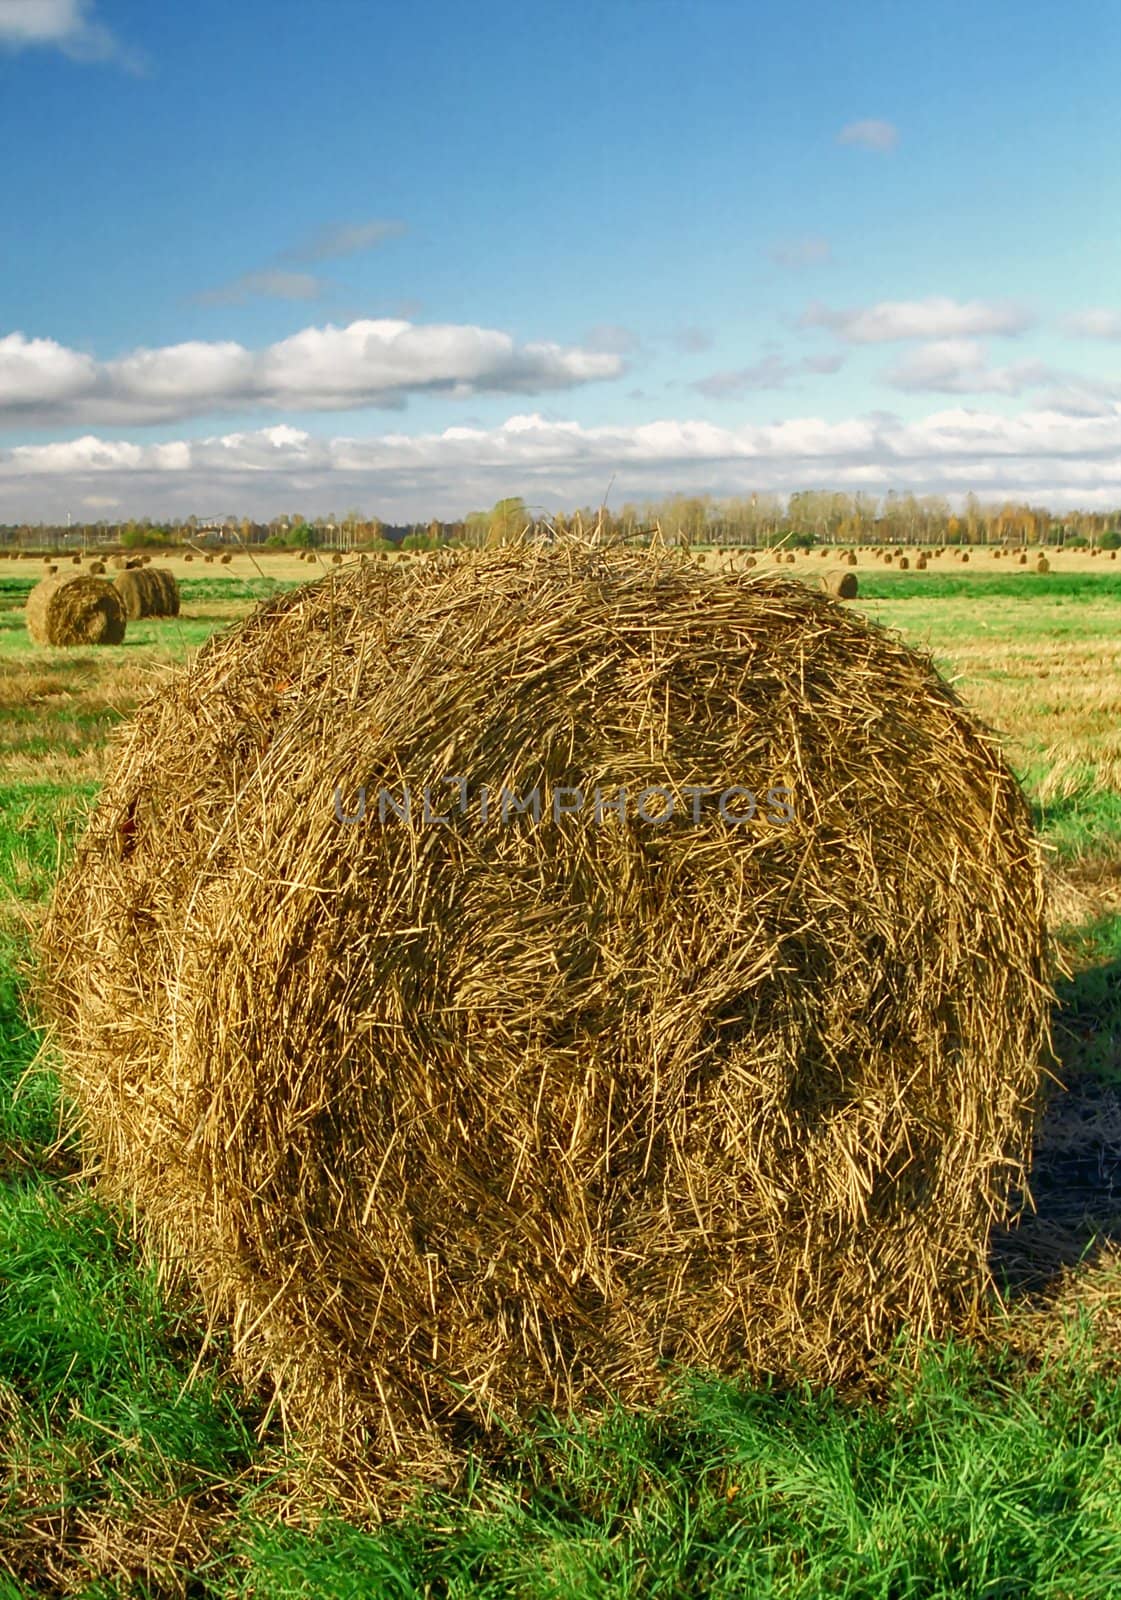 Intorted roll of hay on the aunumn field